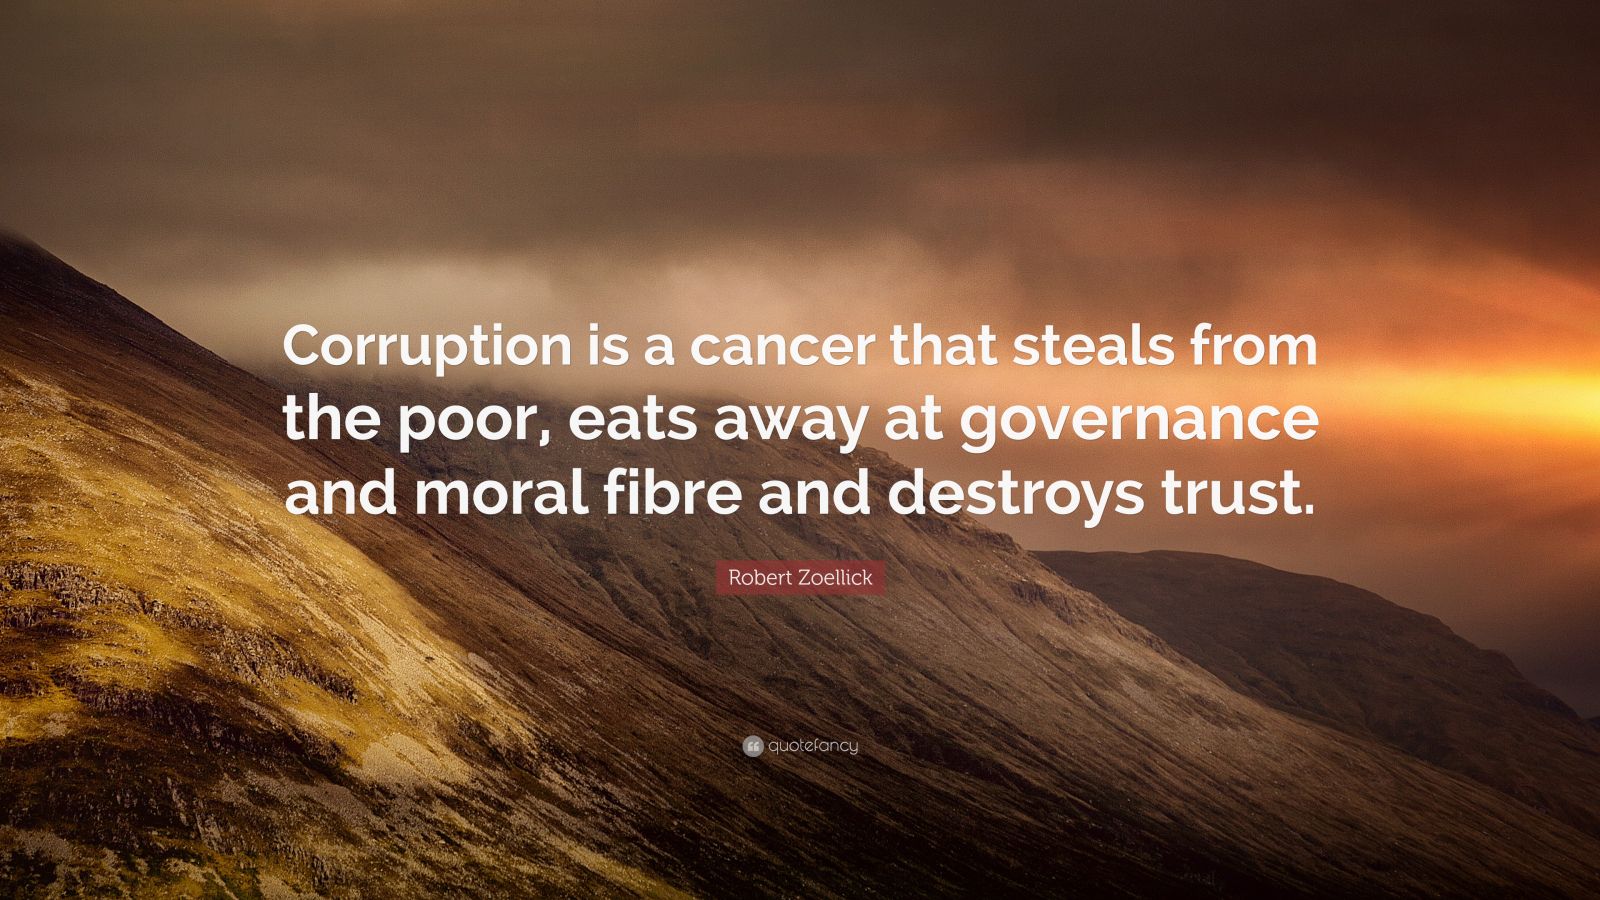 Robert Zoellick Quote: “Corruption is a cancer that steals from the